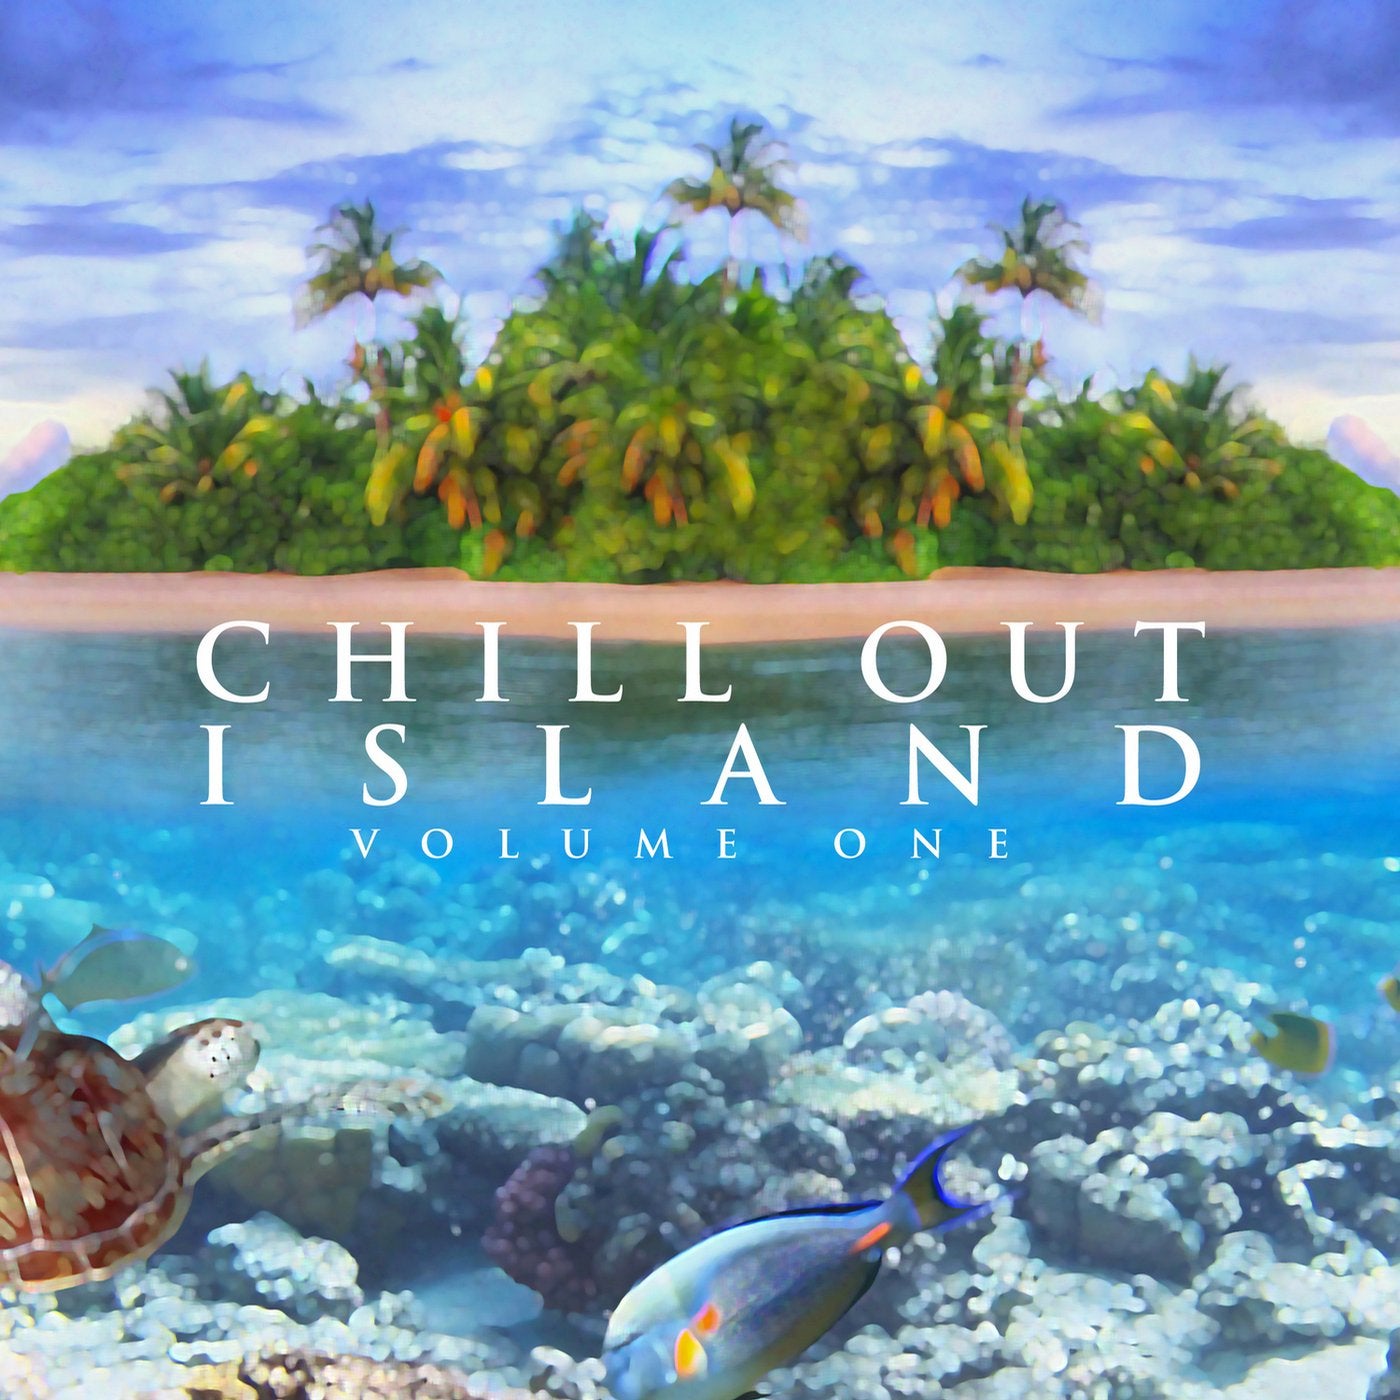 Chill out Island - Volume One